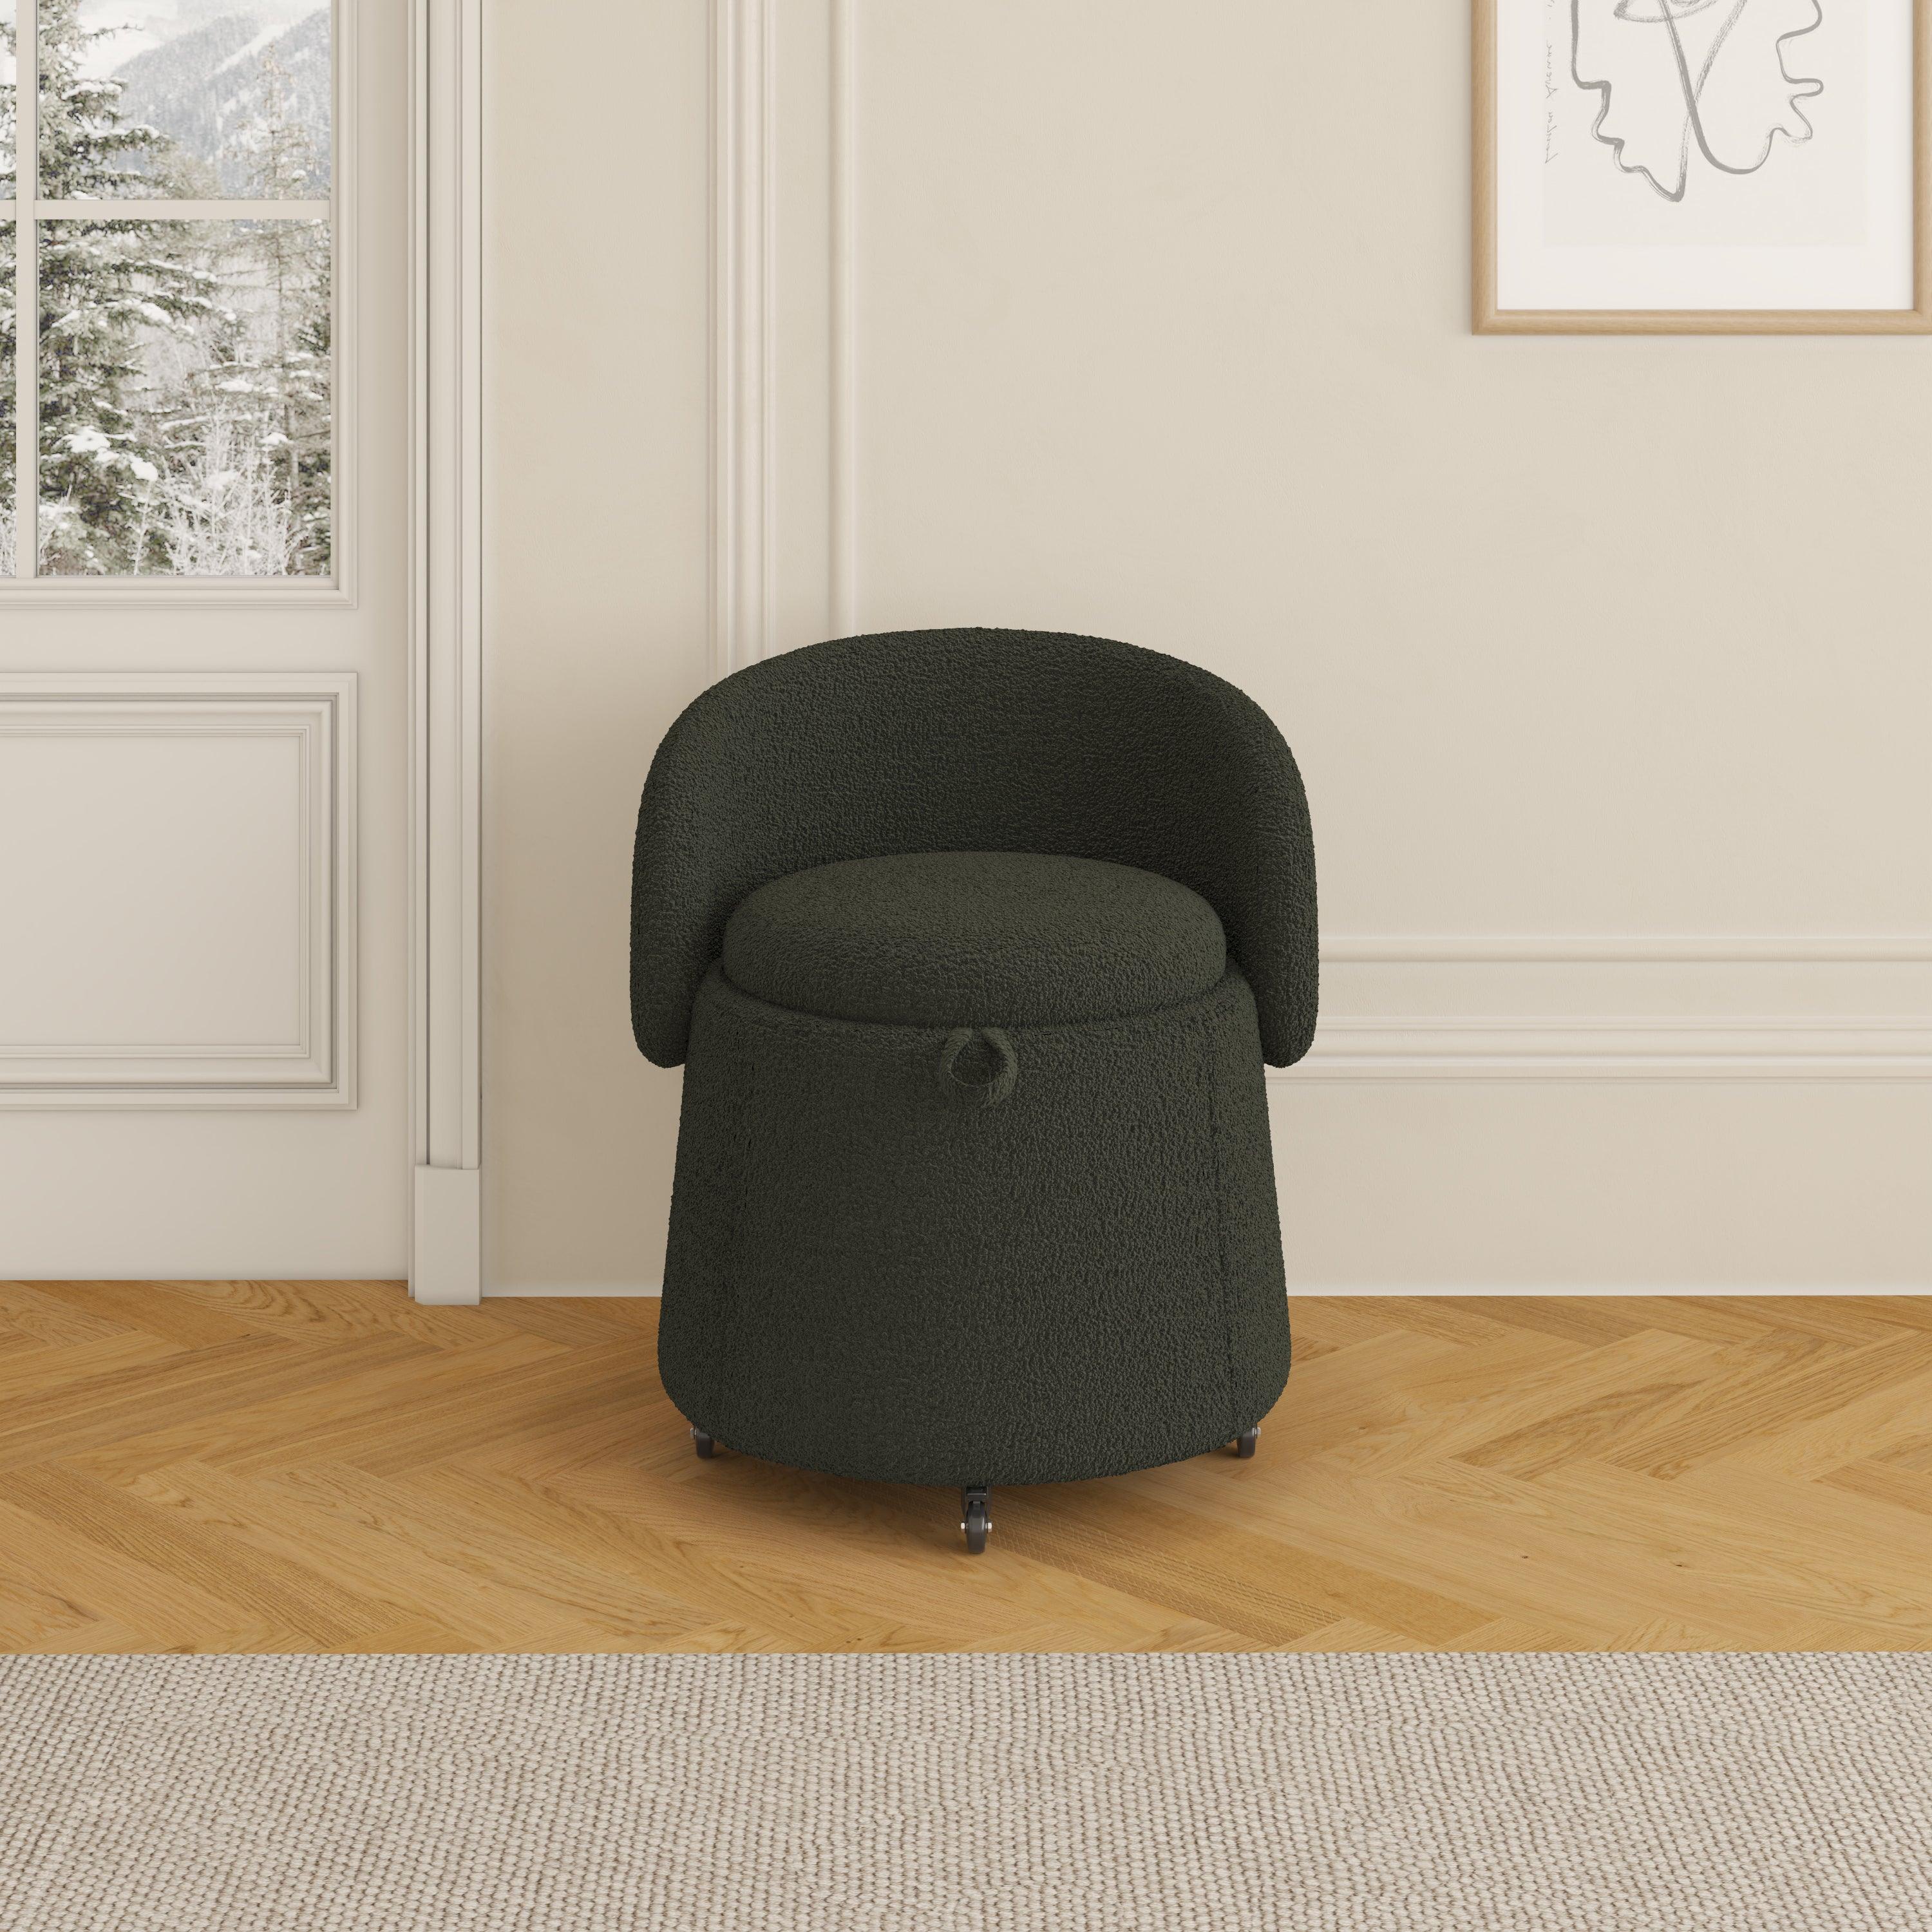 🆓🚛 Multi-Functional Stool Can Be Moved for Storage, Teddy Fleece Bedroom & Living Room, Green